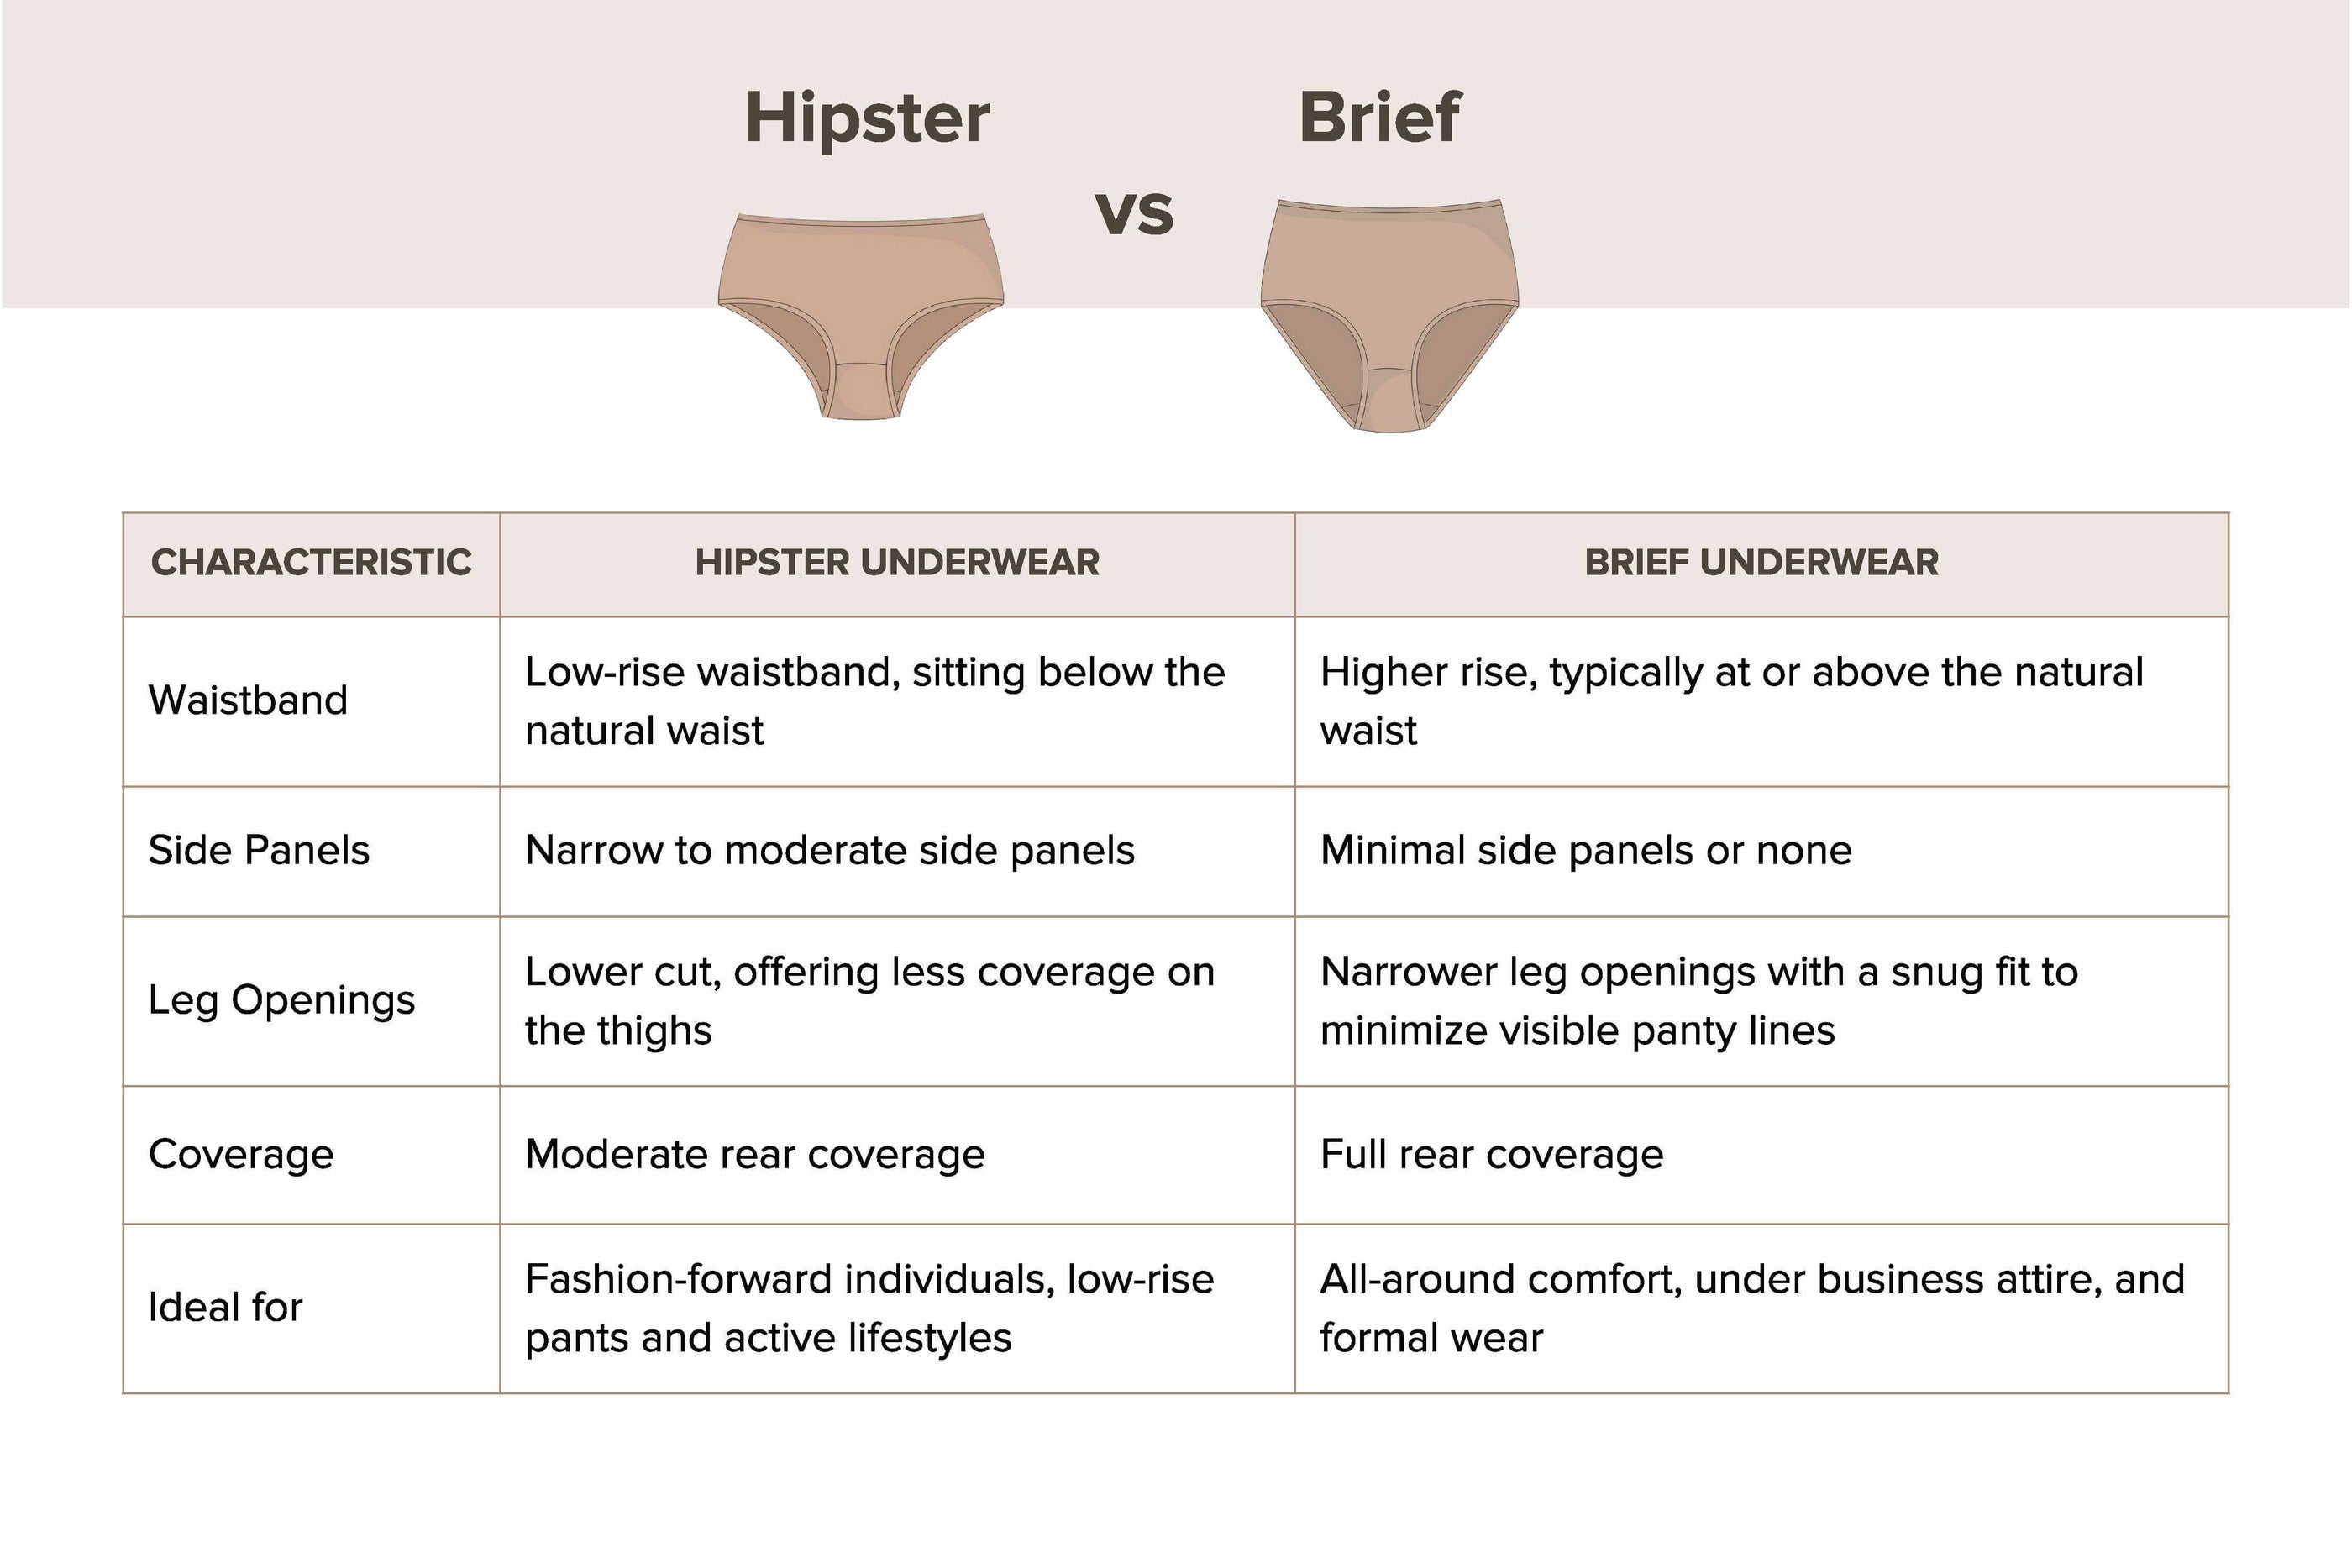 Hipster panties - Stylish, comfortable hipsters